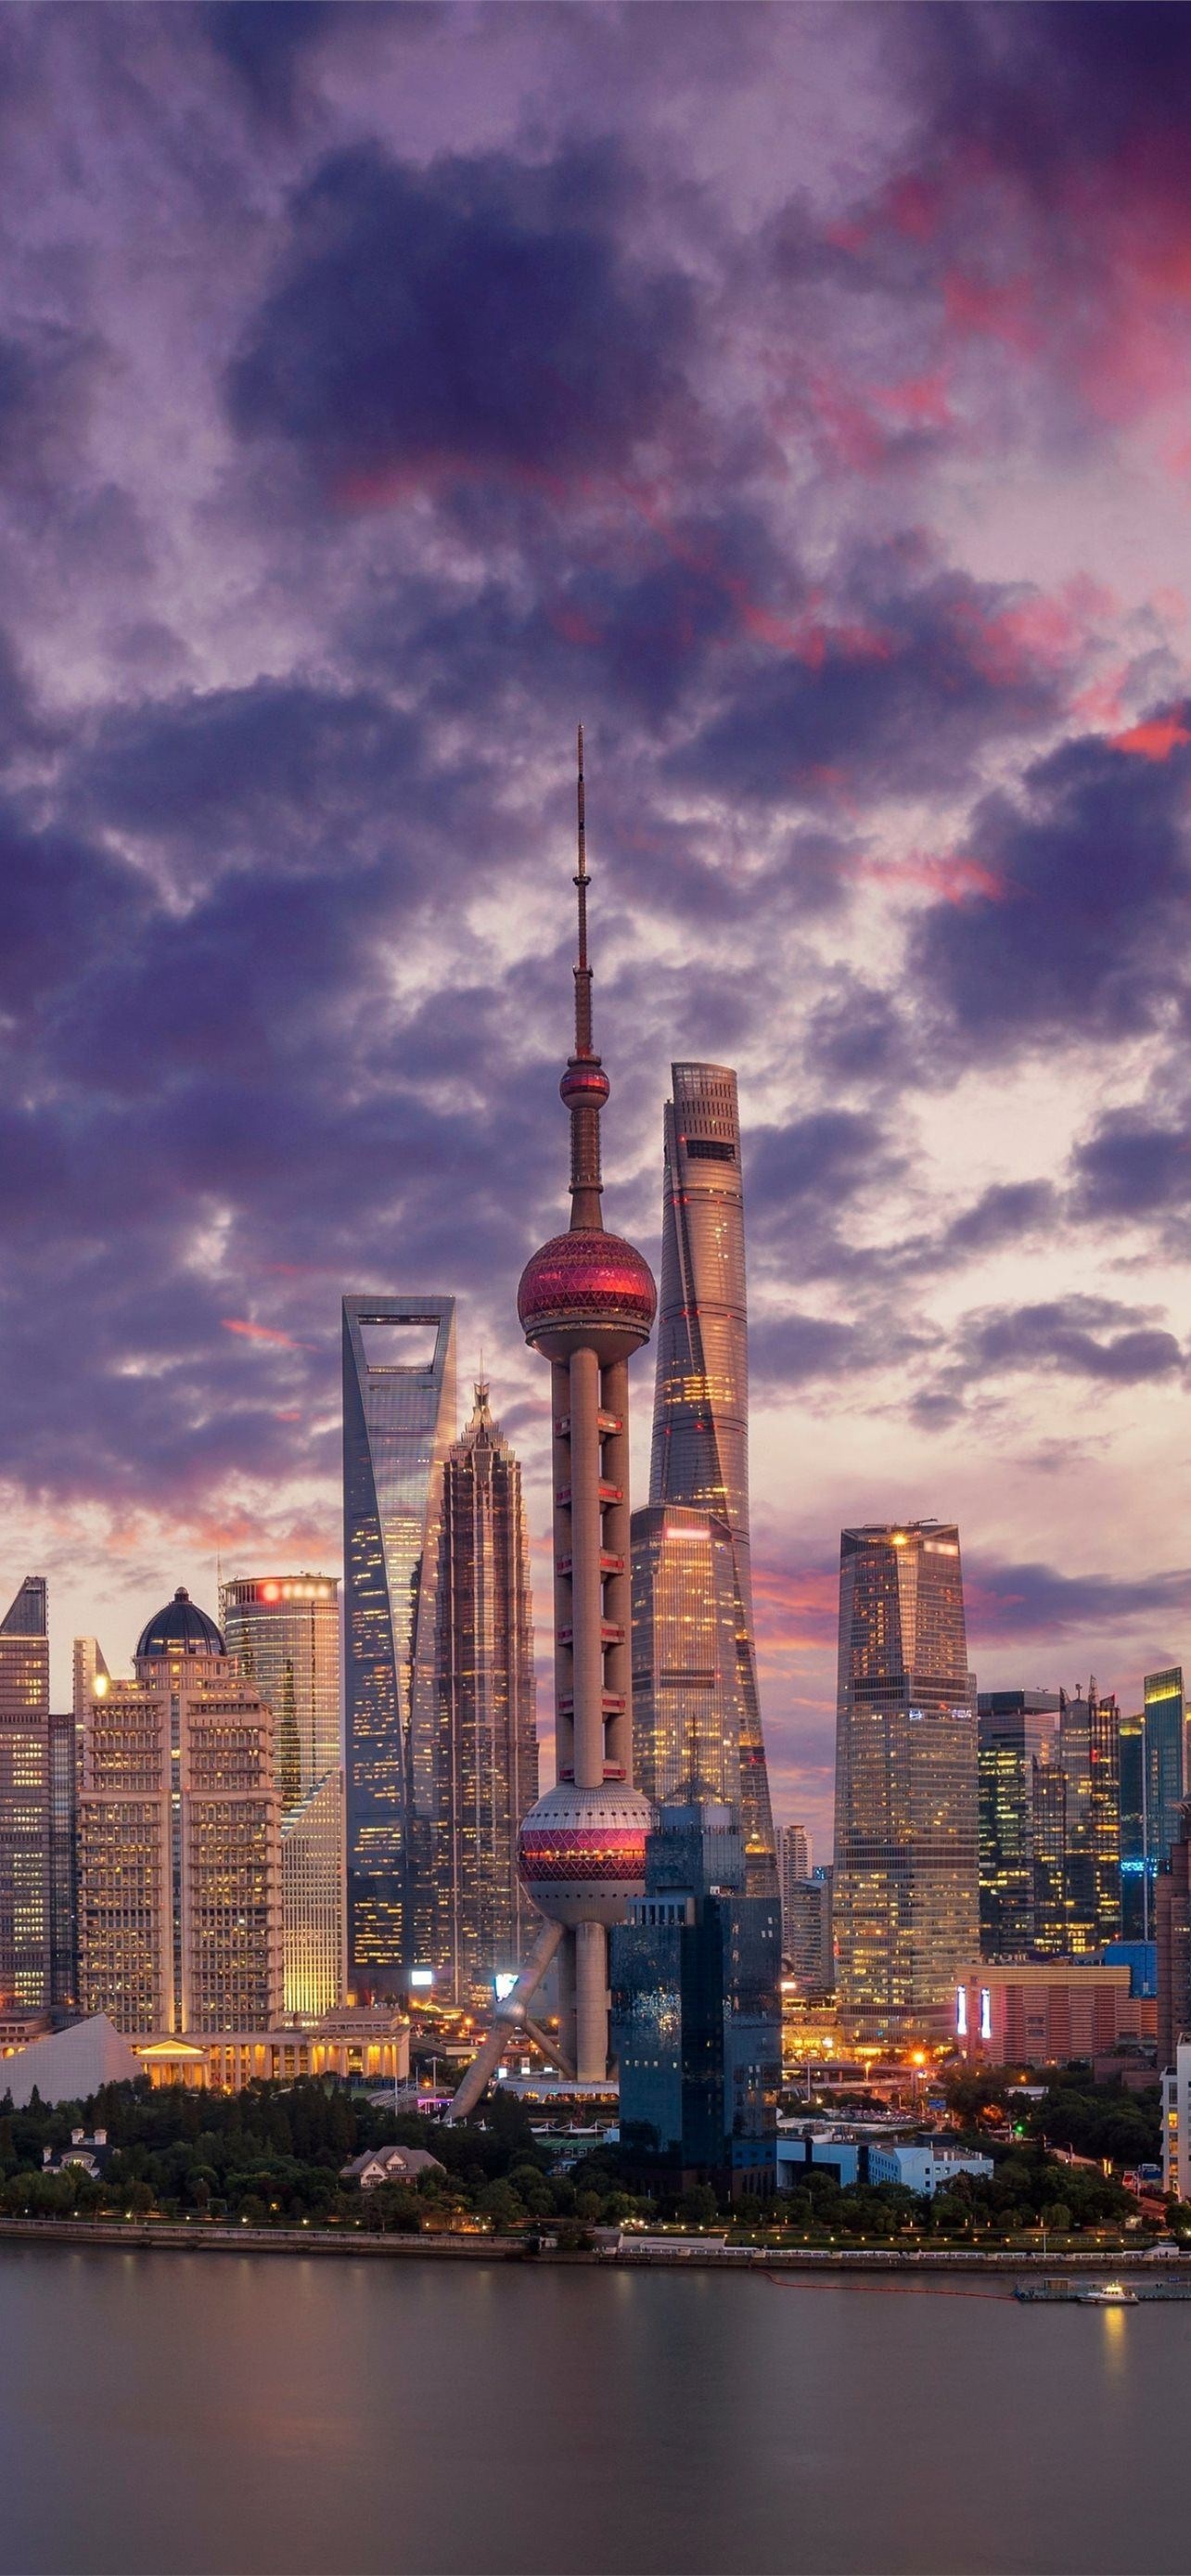 Shanghai Skyline, Best iPhone wallpapers, Stunning cityscapes, Modern architecture, 1290x2780 HD Handy